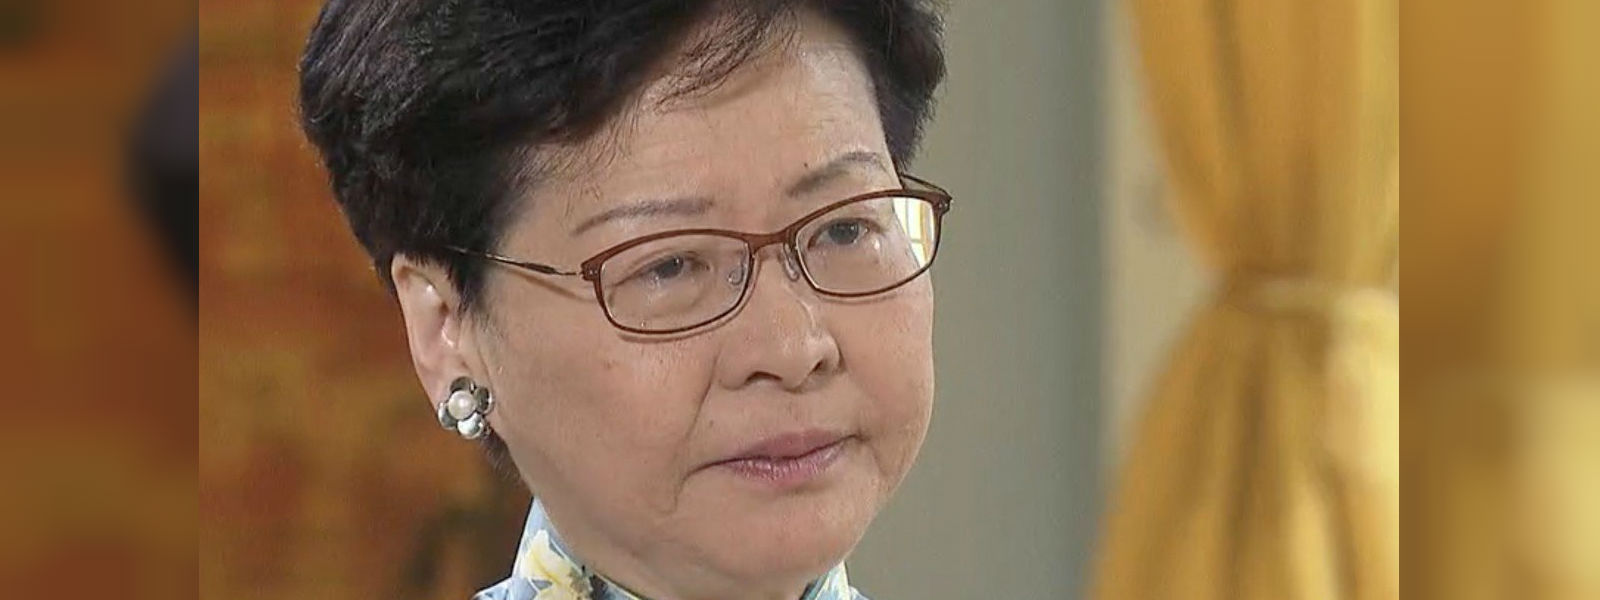 ‘How can I betray Hong Kong” asks tearful Chief Executive Carrie Lam